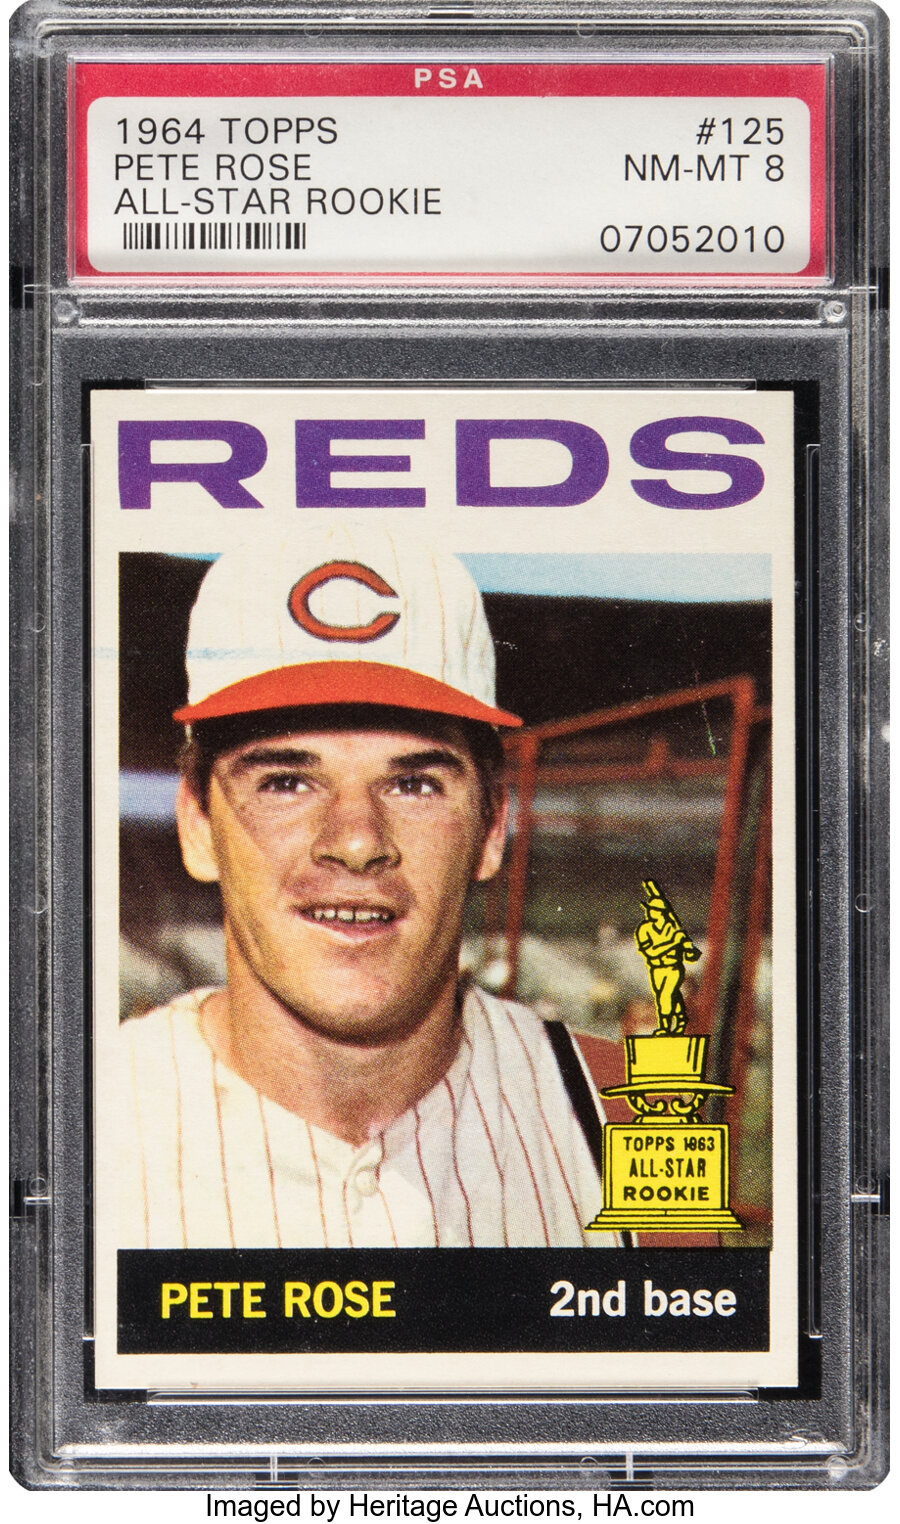 1964 Topps Pete Rose (All-Star Rookie) #125 PSA NM/MT 8